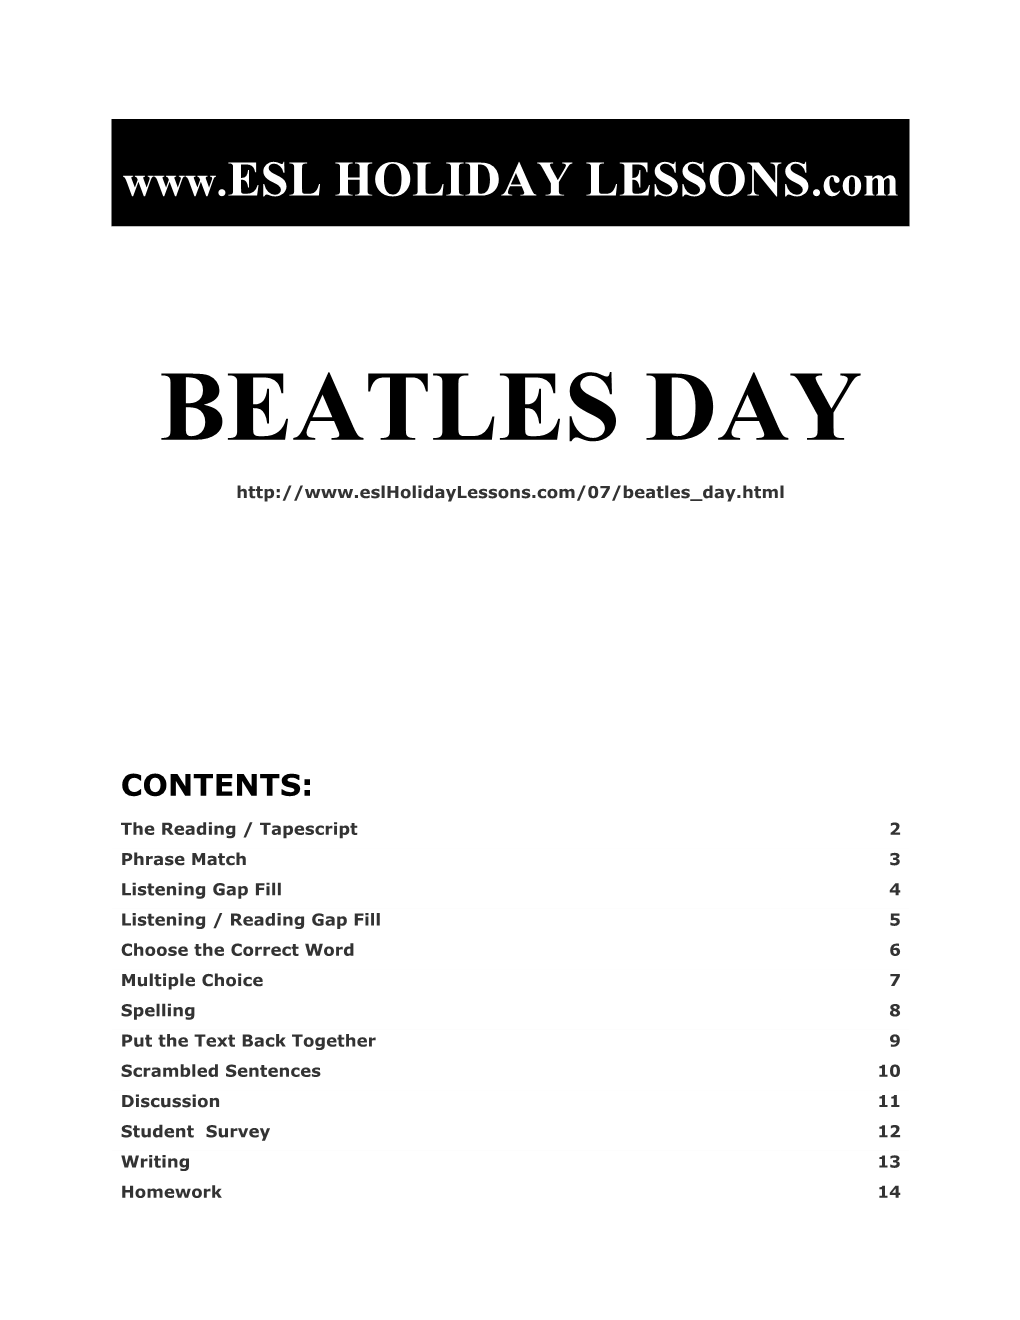 Holiday Lessons - BEATLES DAY